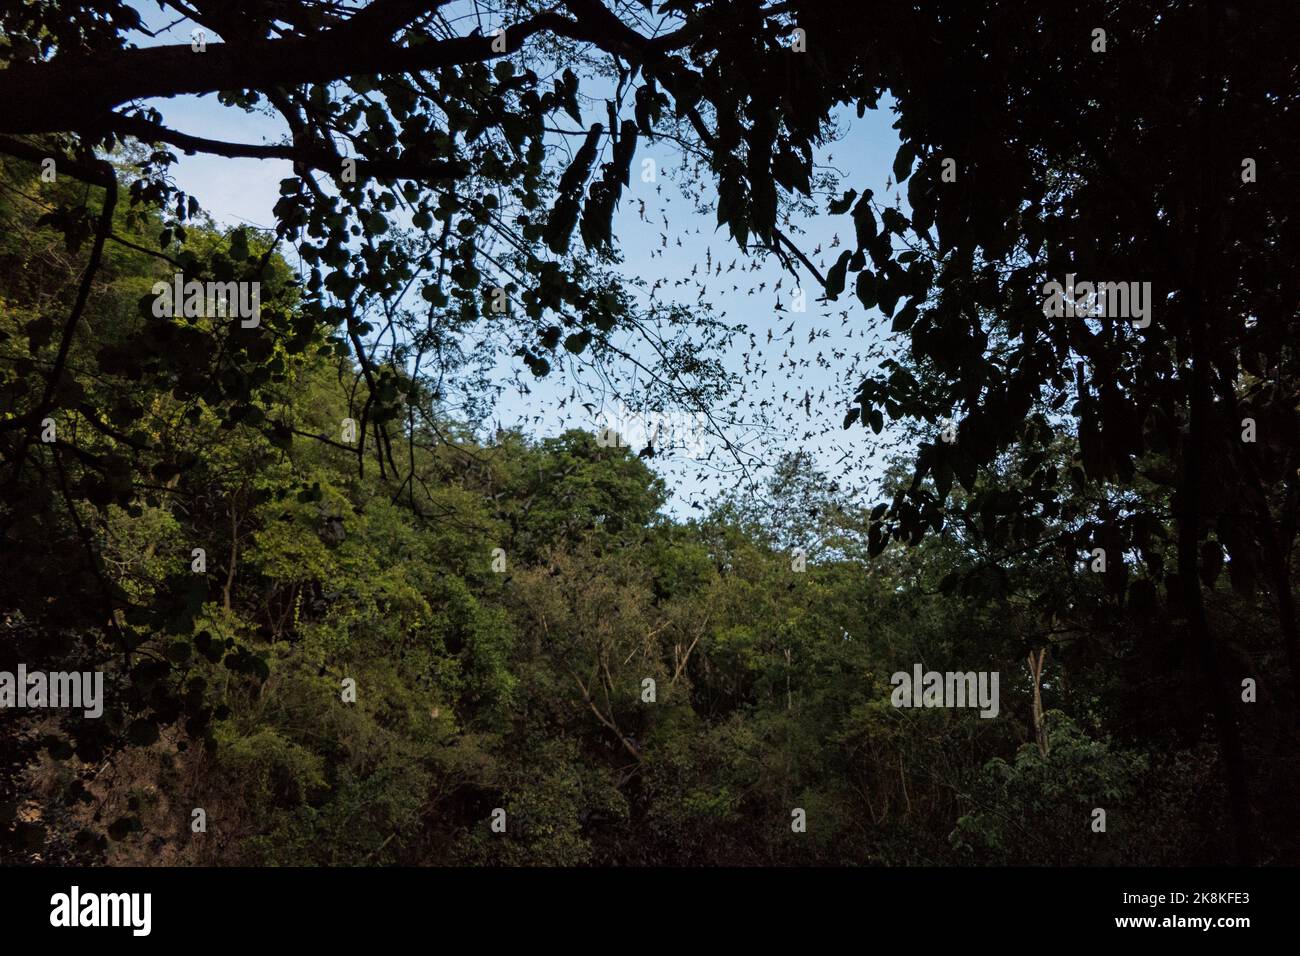 The Bat Volcano of Calakmul in the forest of Campeche, Mexico (Volcán de los Murciélagos). Millions of bats fly out of a dry cenote at dusk Stock Photo